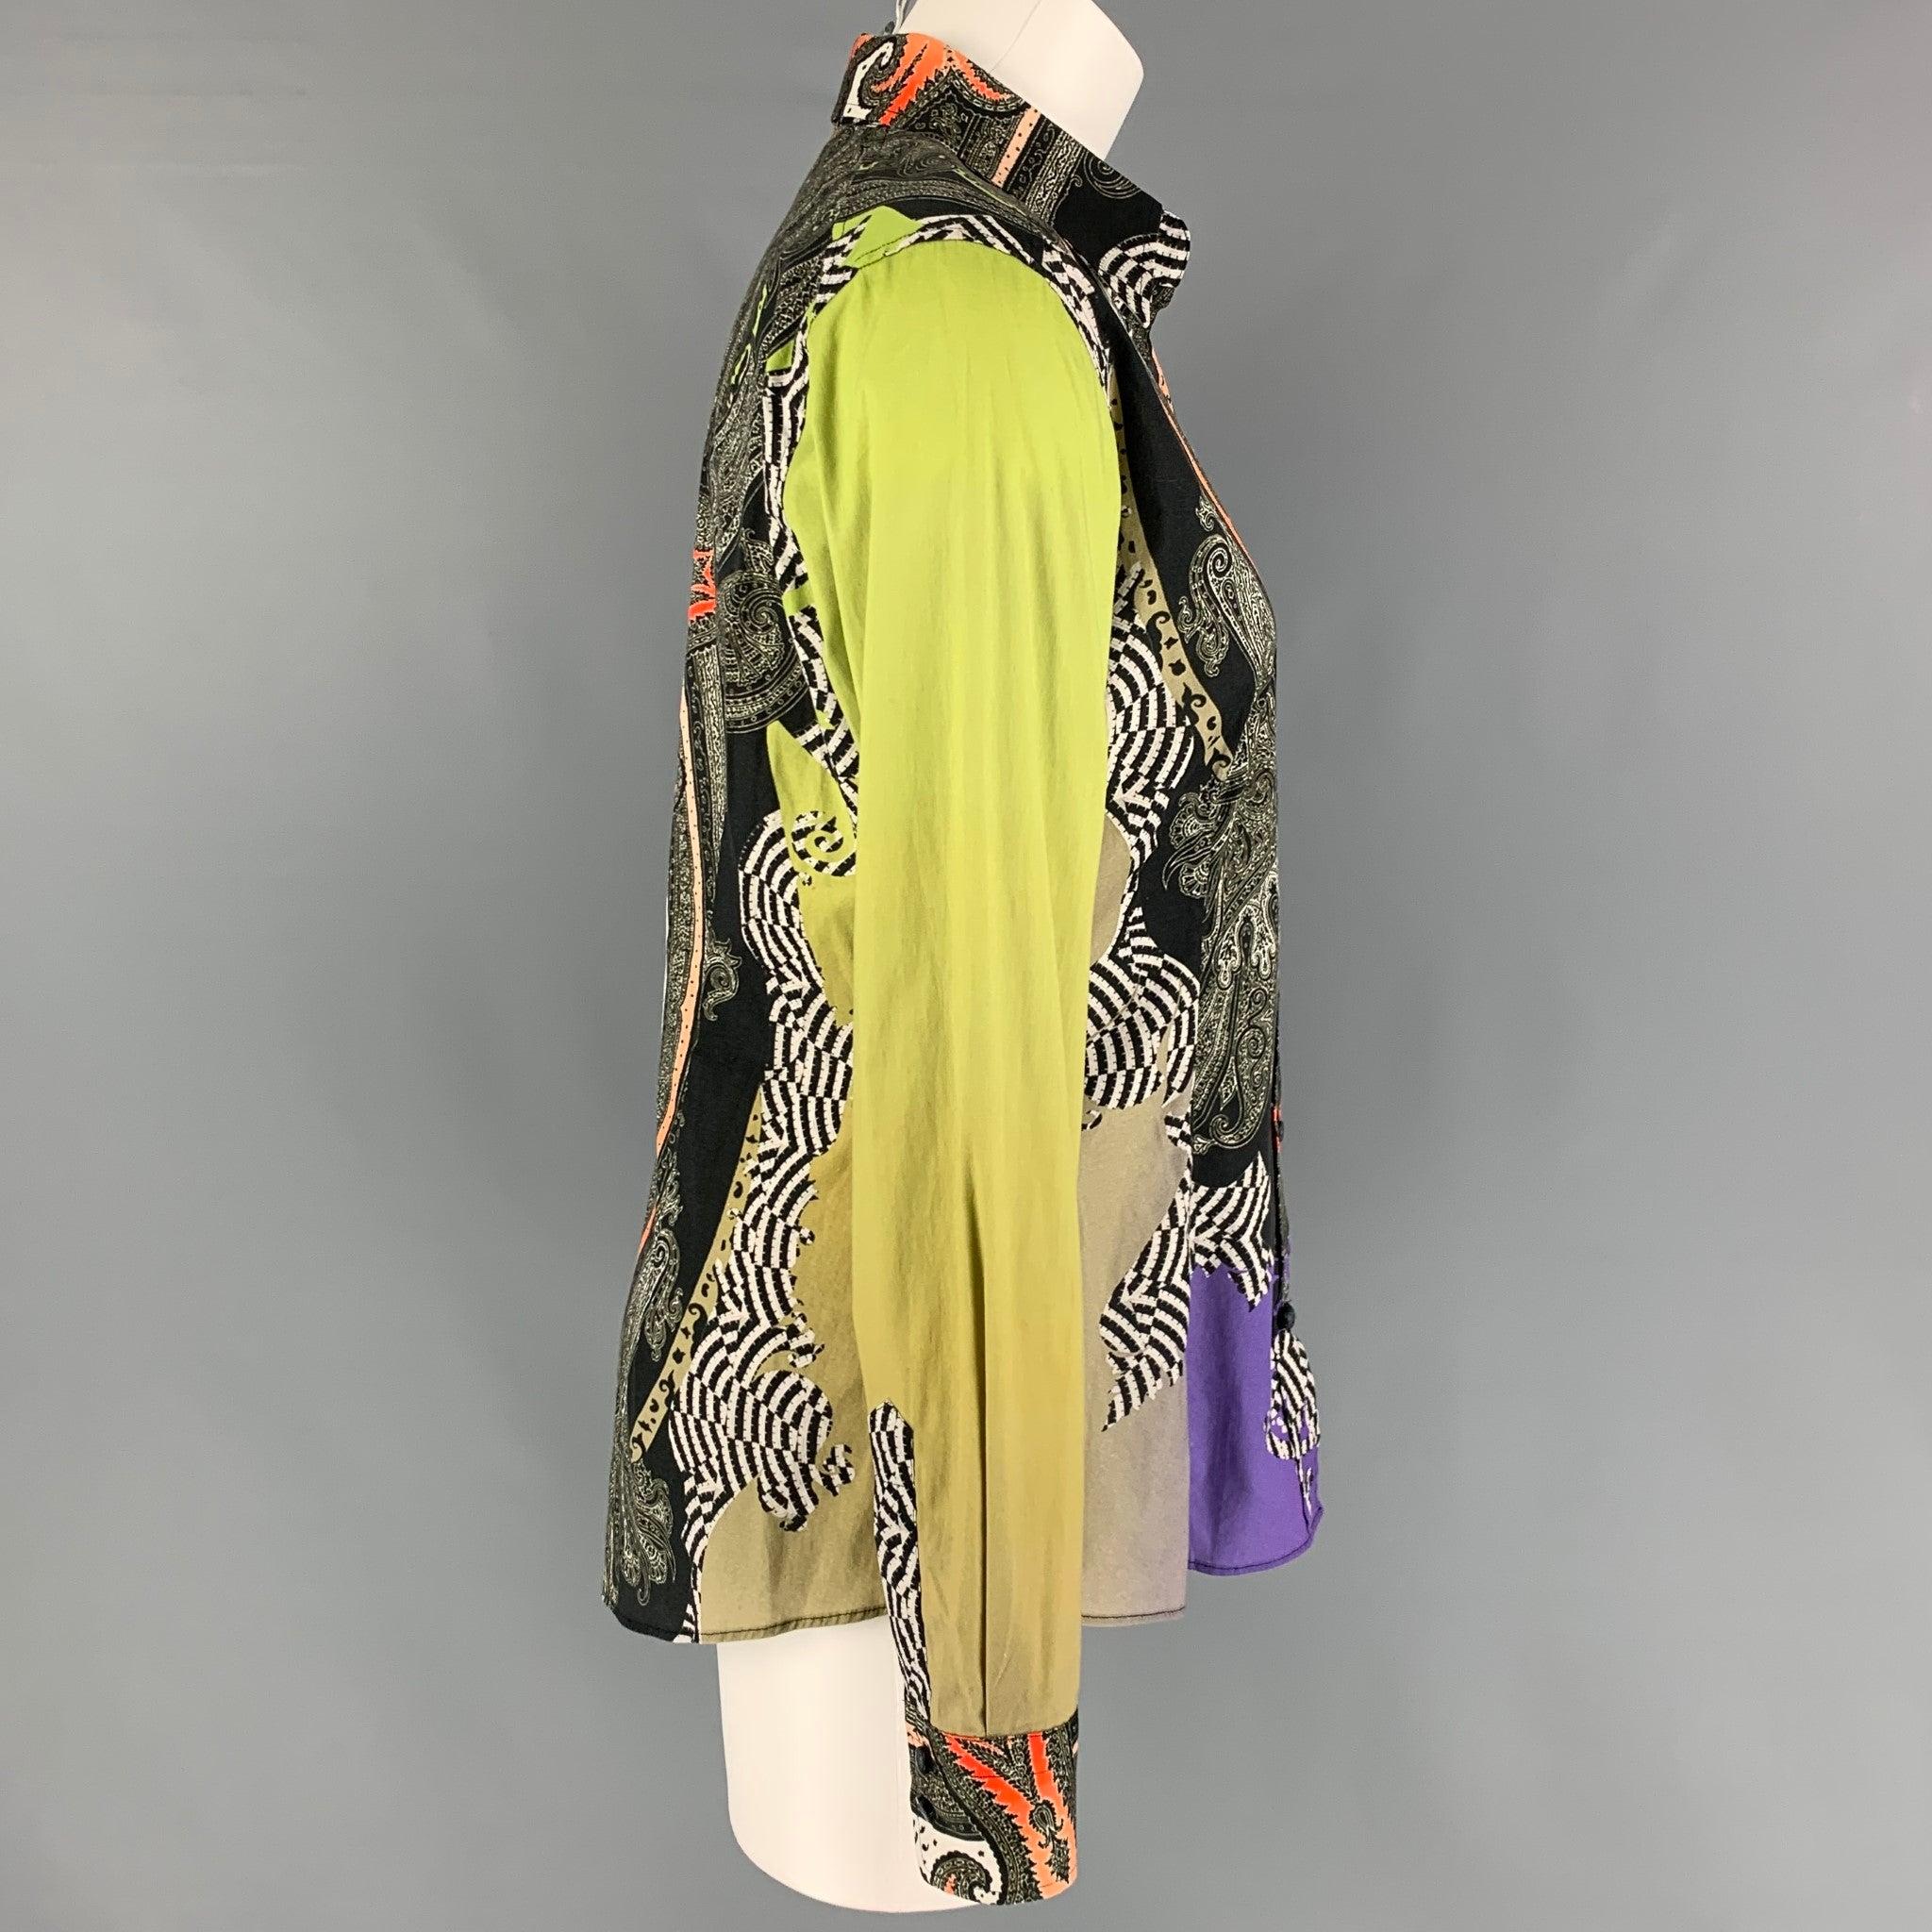 ETRO blouse comes in a multi-color paisley material featuring a spread collar and a button up closure. Made in Italy.
Very Good
Pre-Owned Condition. 

Marked:   44  

Measurements: 
 
Shoulder: 15.5 inches  Bust:
36 inches  Sleeve: 24.5 inches 